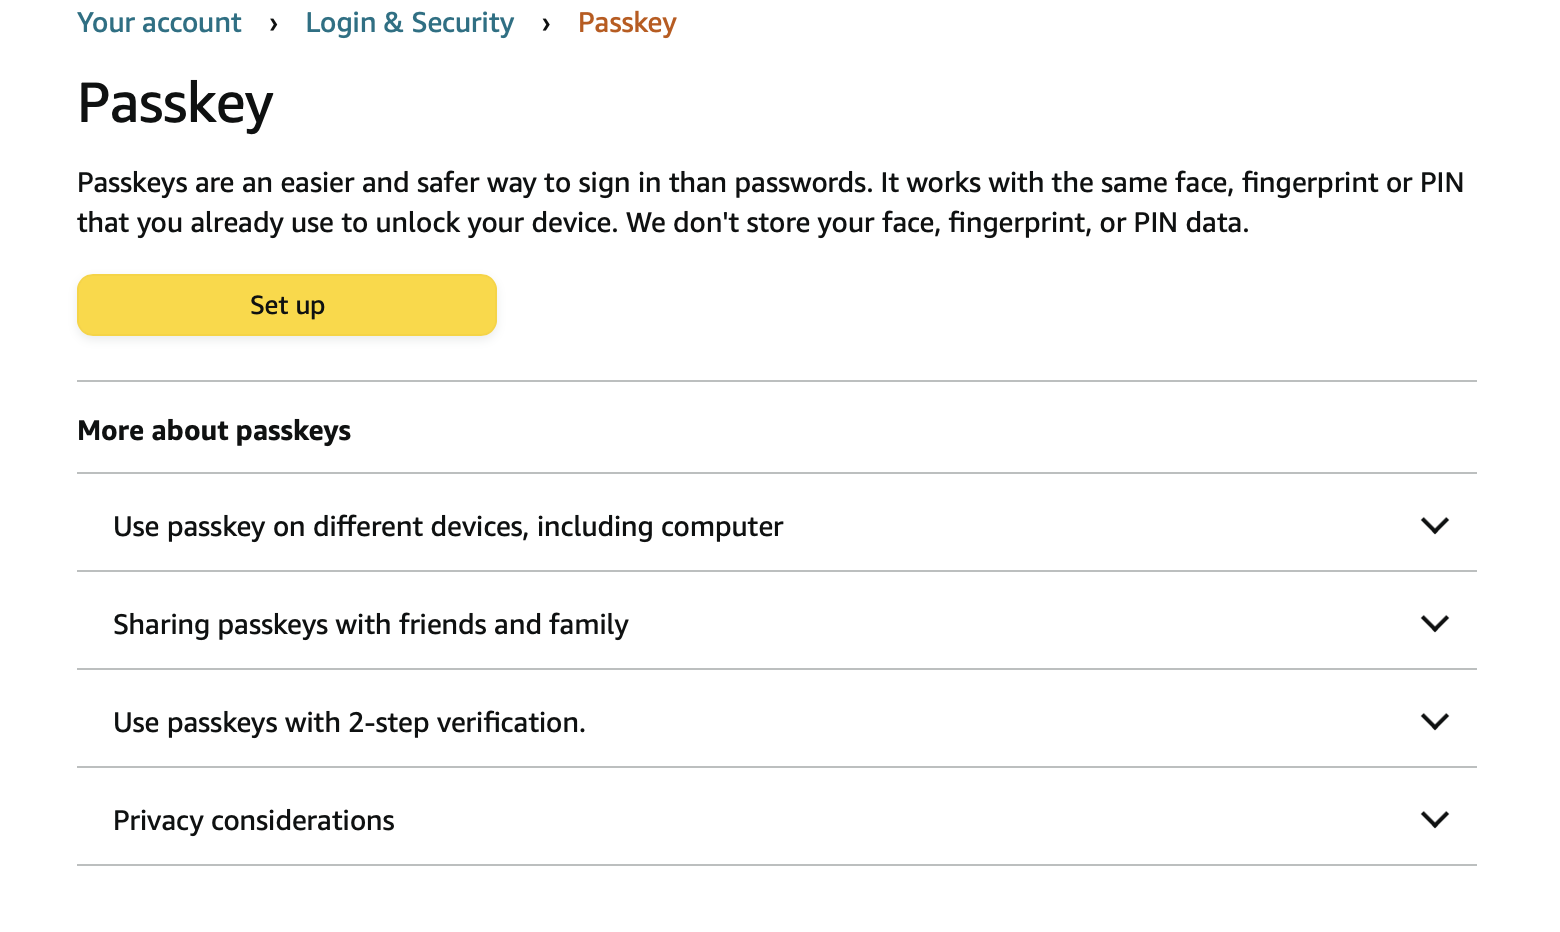 A screenshot showing passkey set up in Amazon's settings.